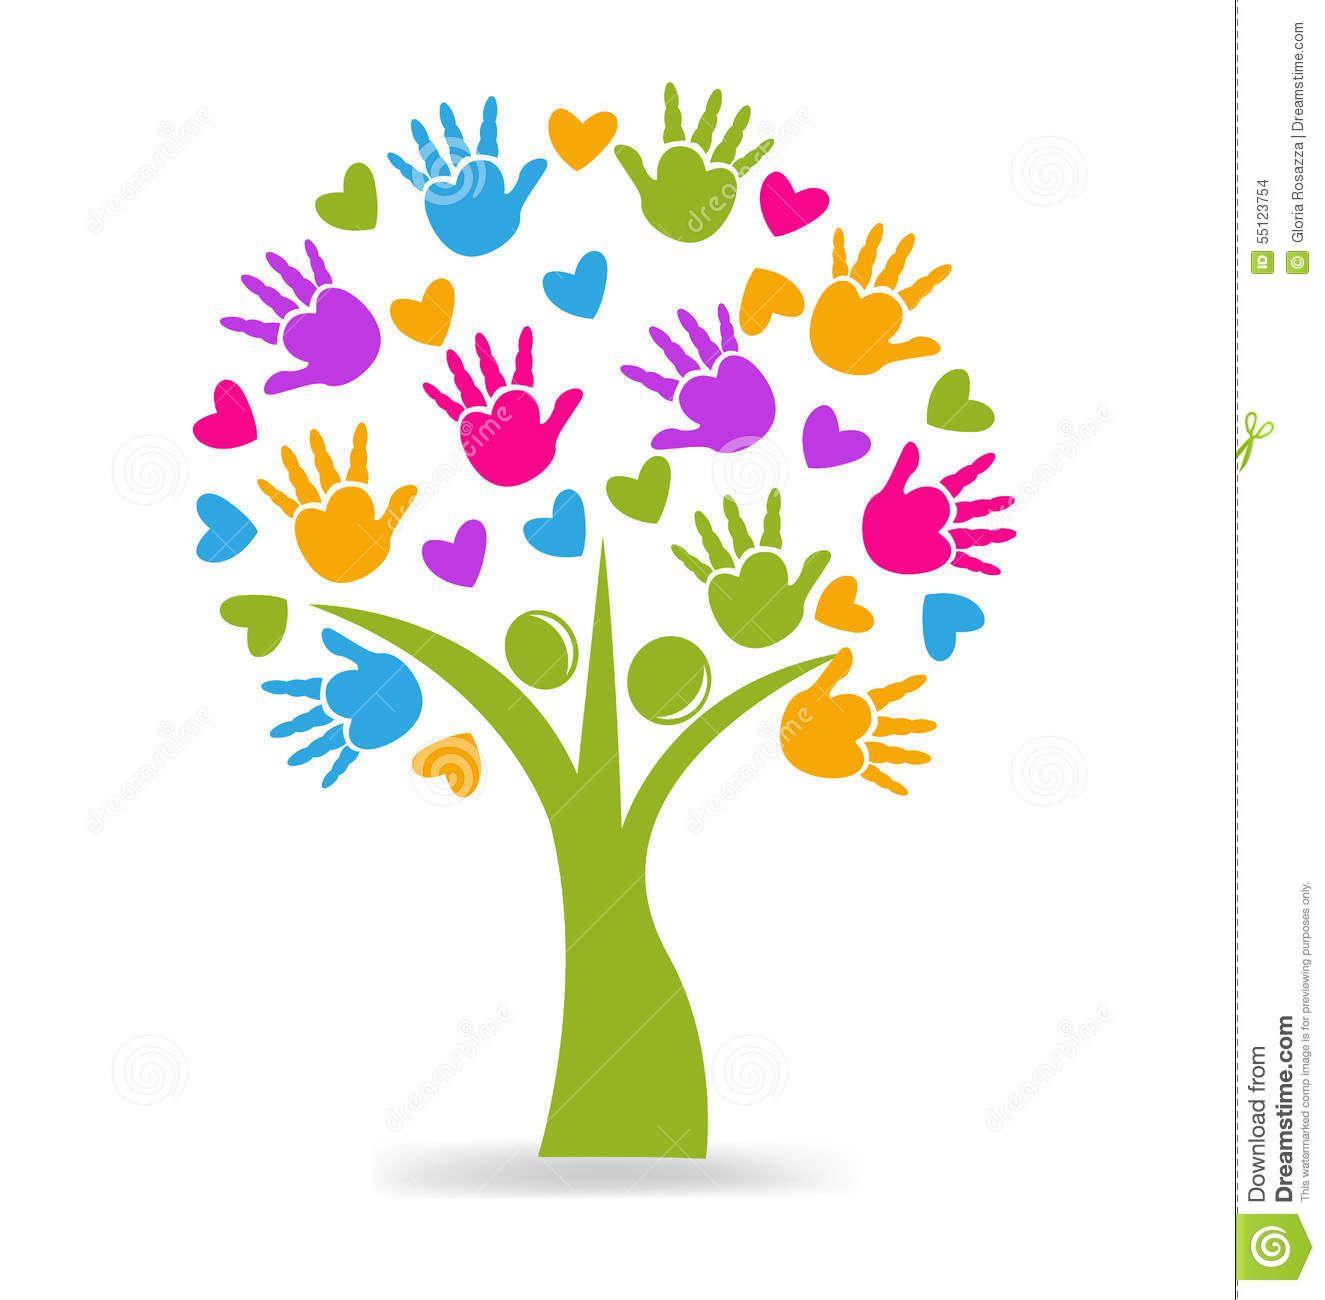 Hearts Logo - Tree Hands And Hearts Logo - Download From Over 41 Million High ...